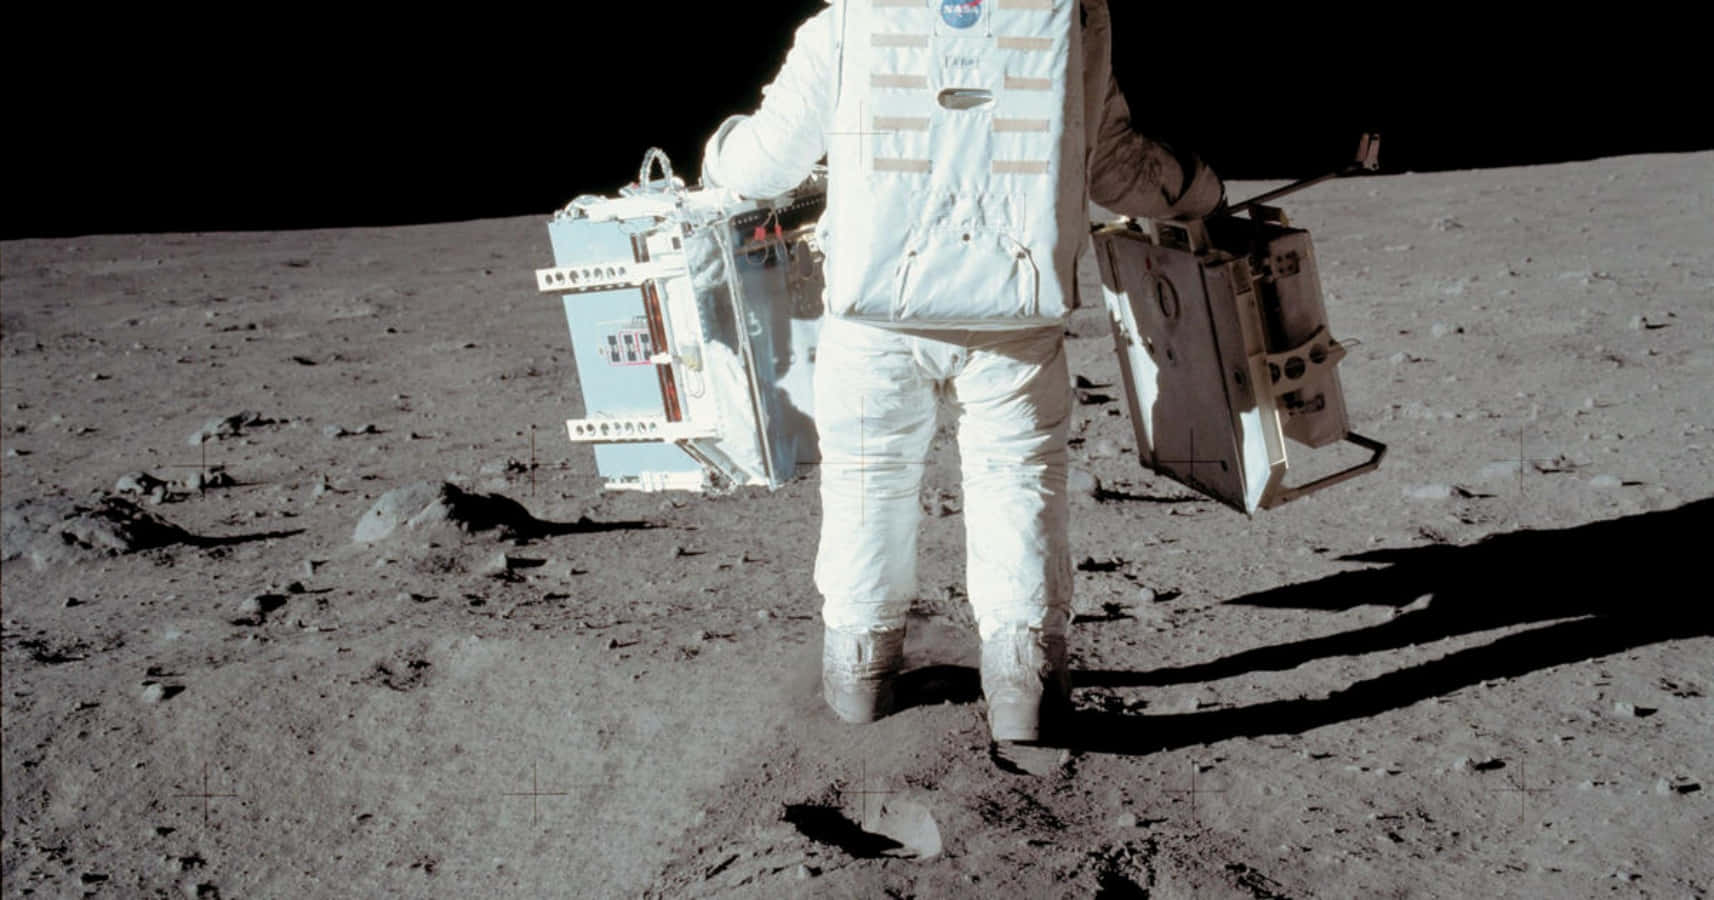 A Man In White Standing On The Moon With His Luggage